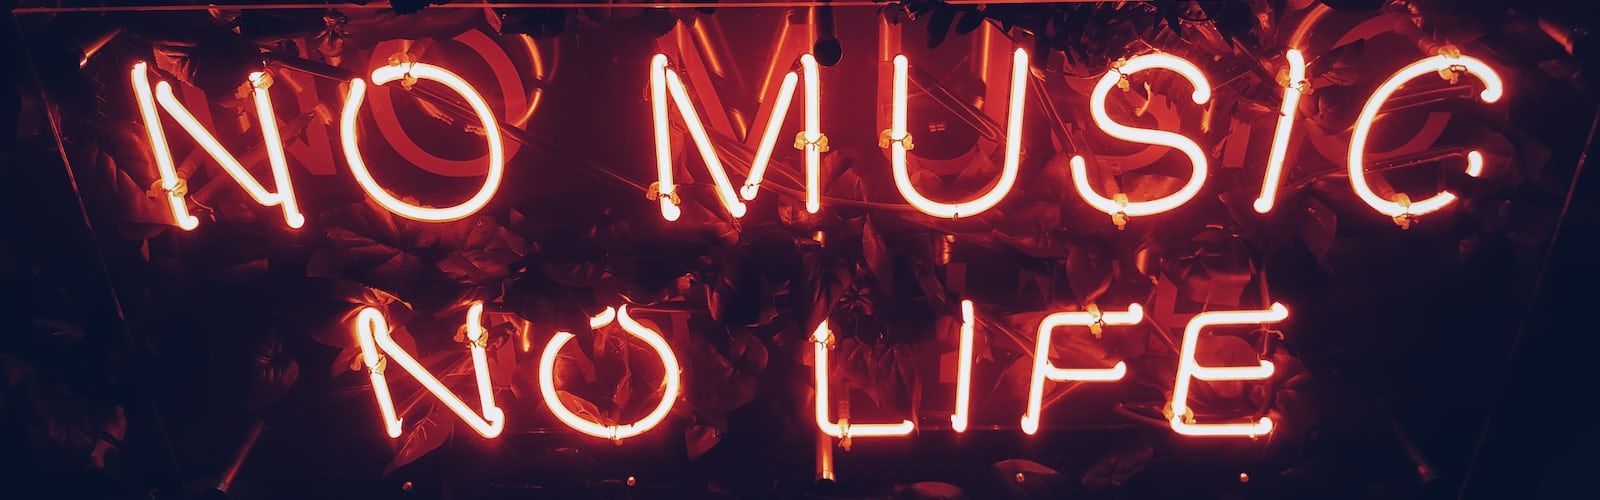 A neon sign that says no music, life - Spotify